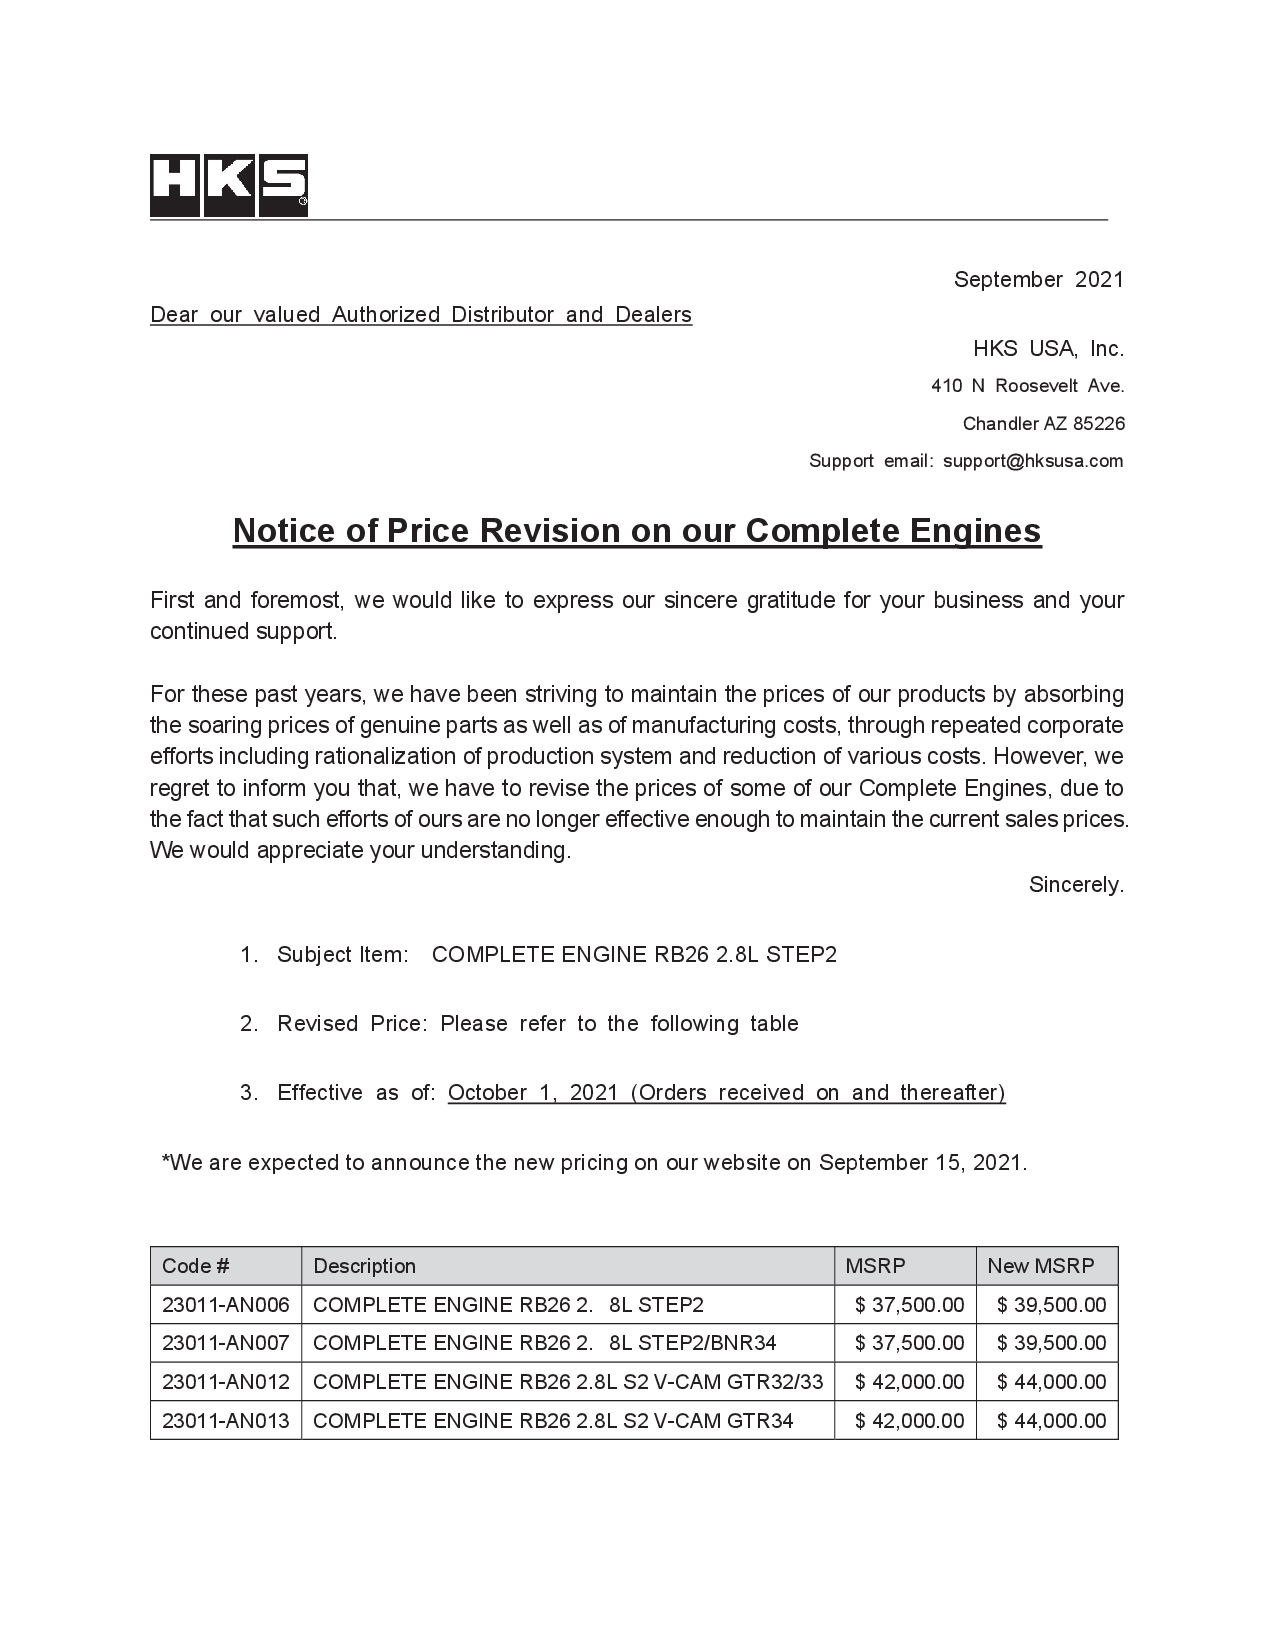 Notice of Price Revision of Complete Engine for Skyline GT-R.png